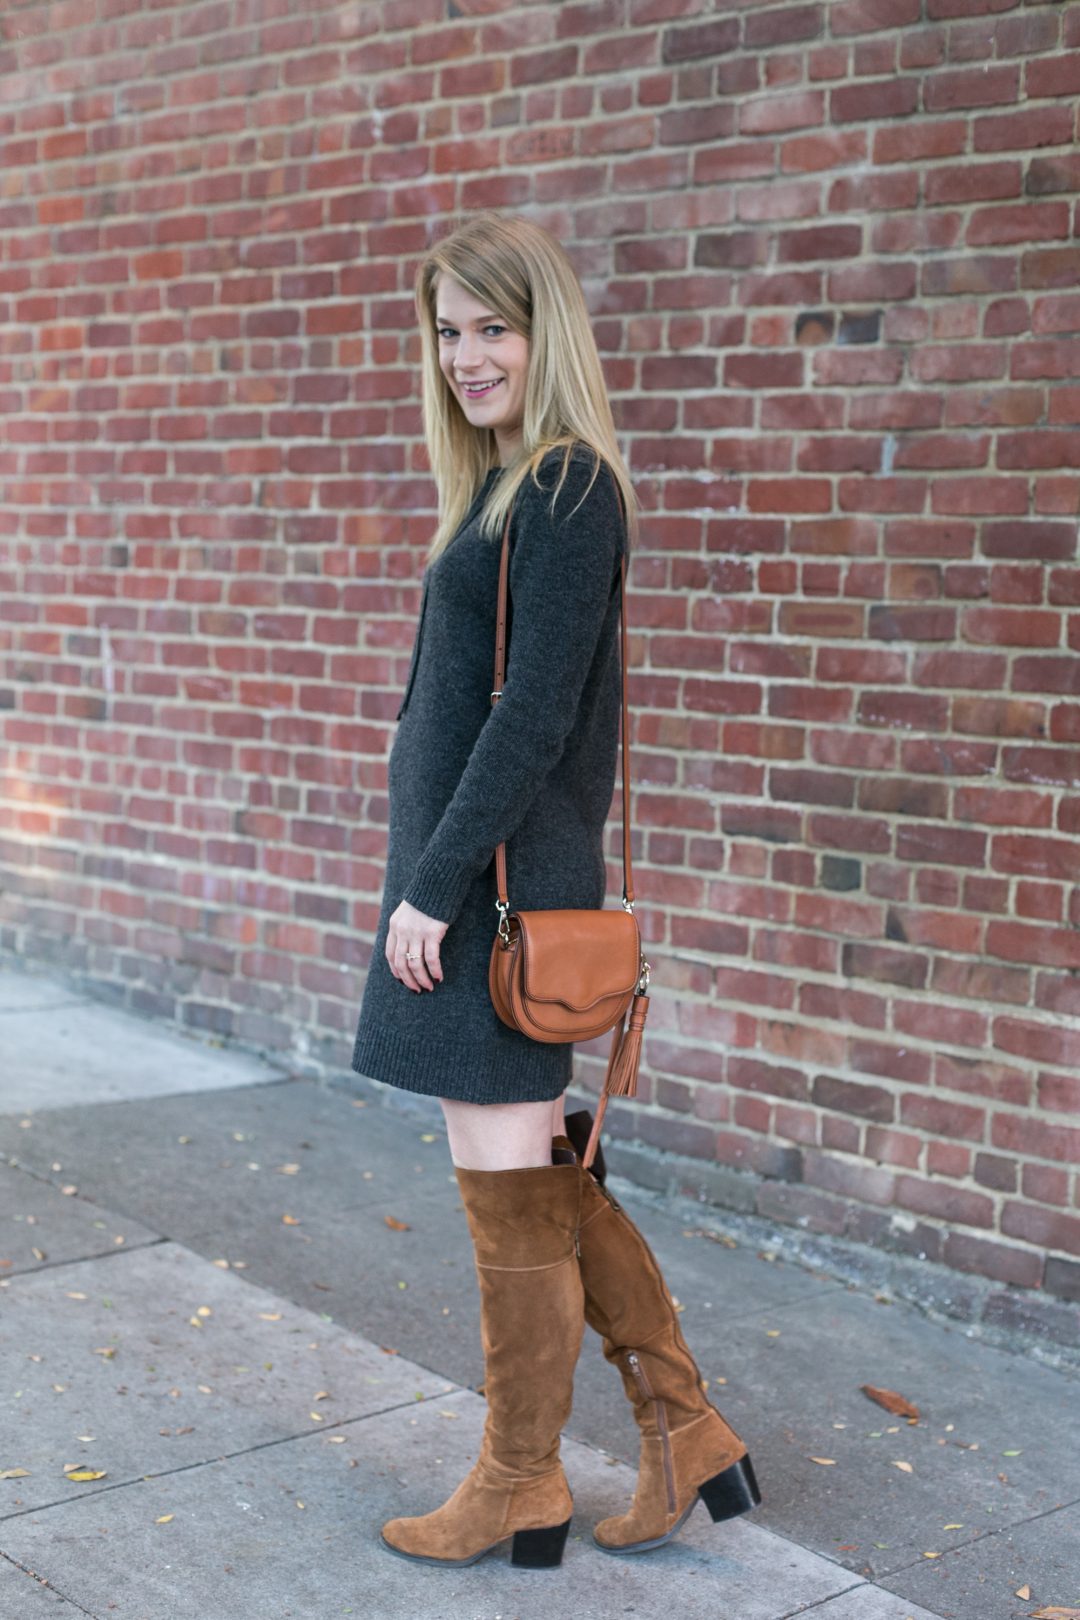 A sweater dress with over the knee boots is the perfect combination for fall